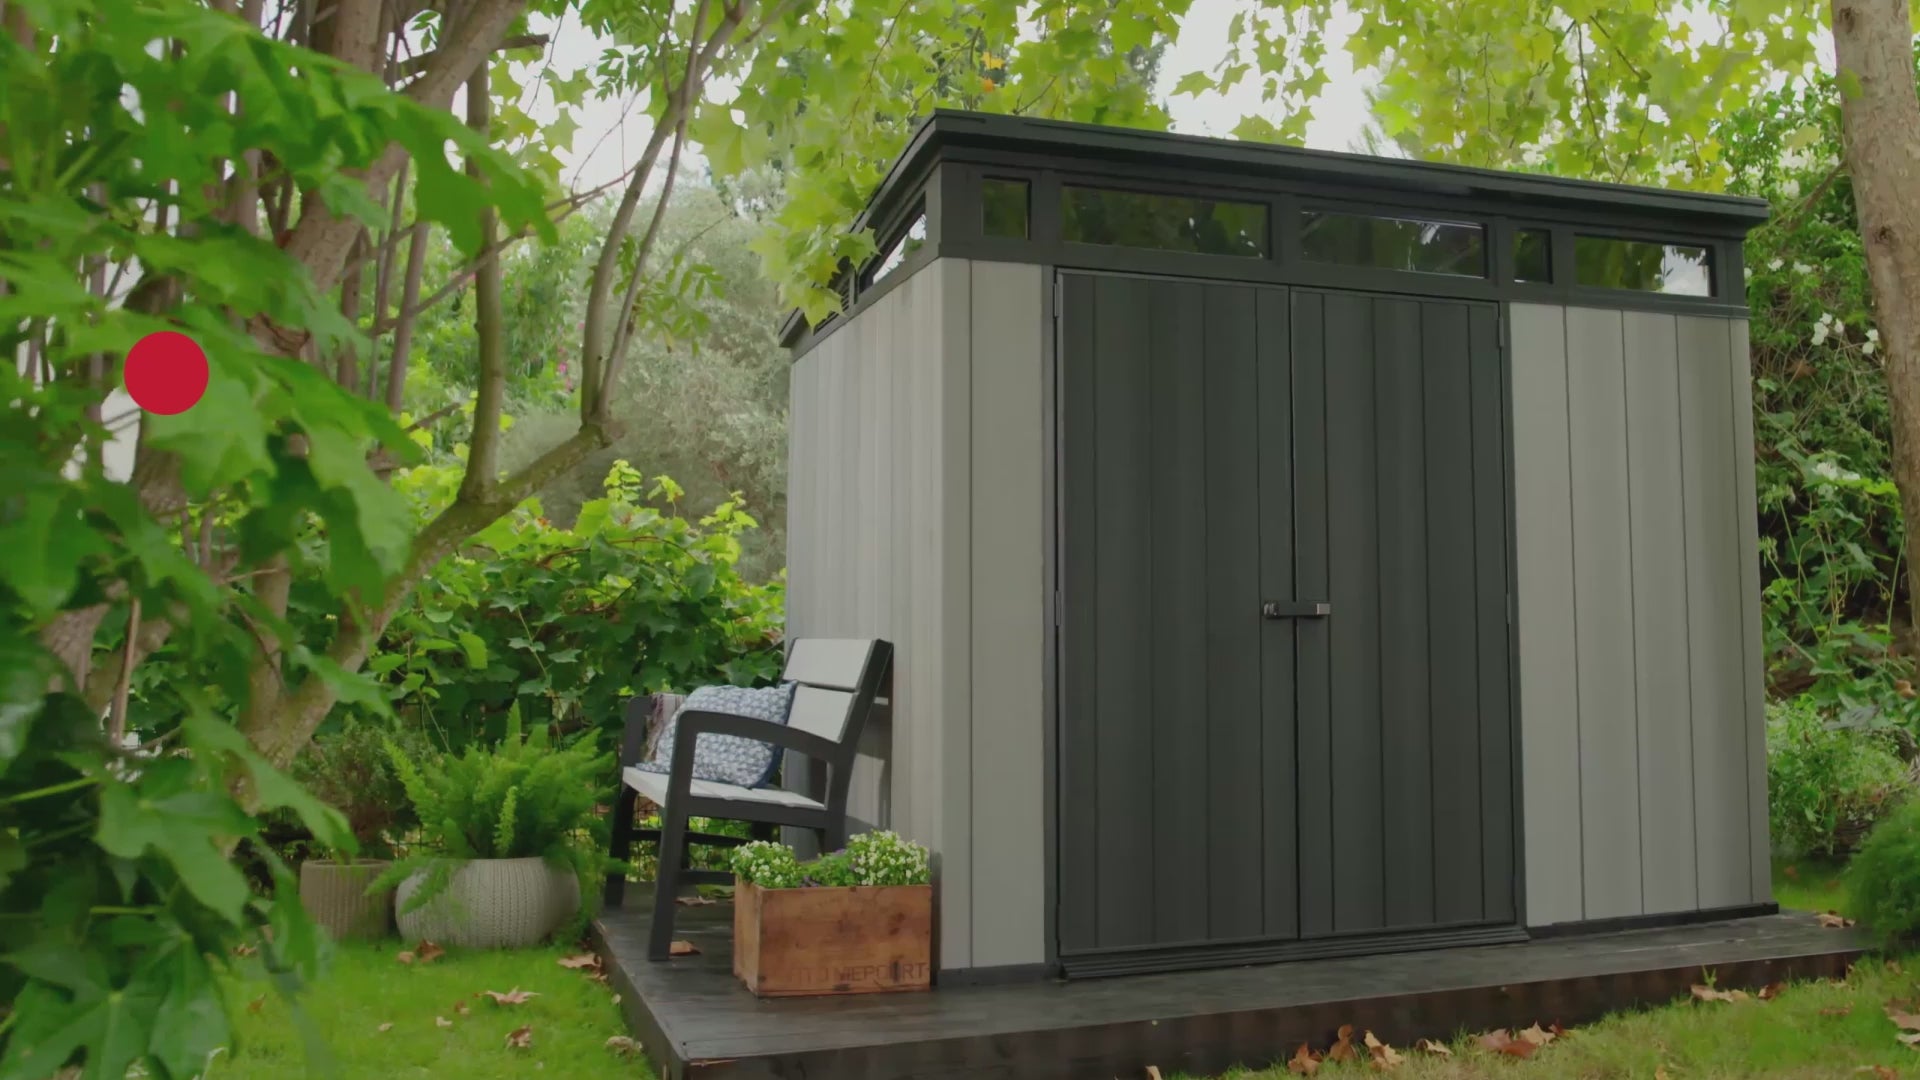 Video of the Keter Artisan 9x7 shed